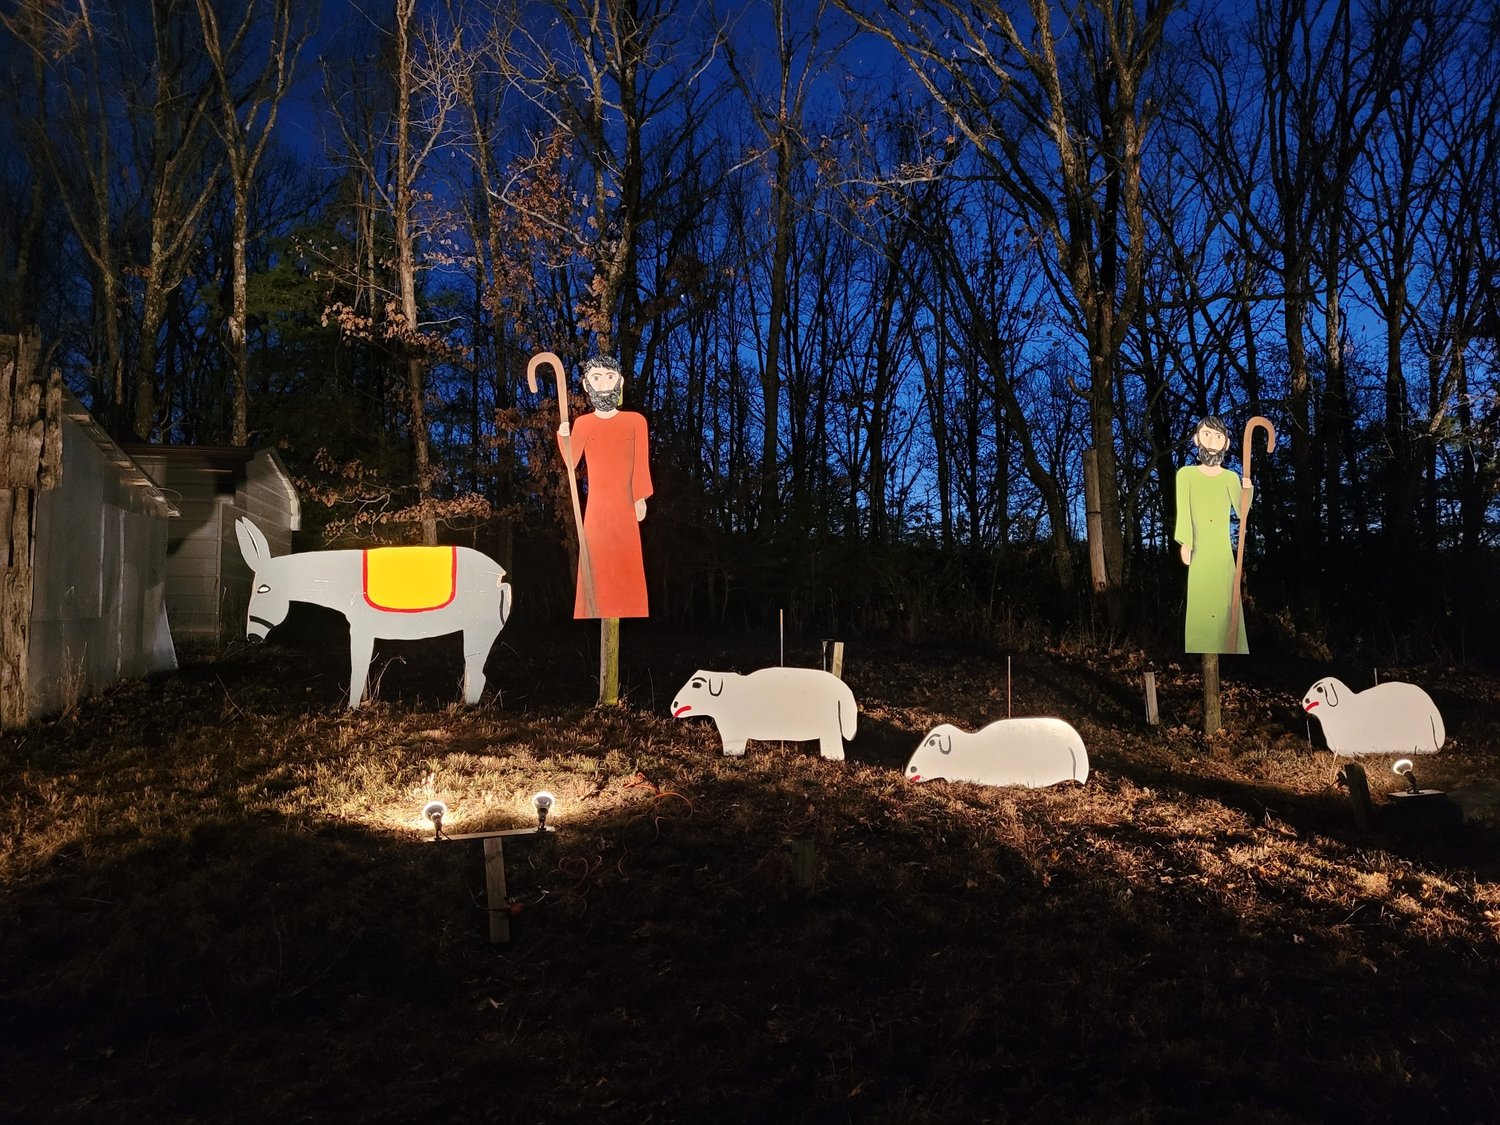 It's almost night when the lights come on at the Community Betterment Association's hilltop Nativity scene in Meta.